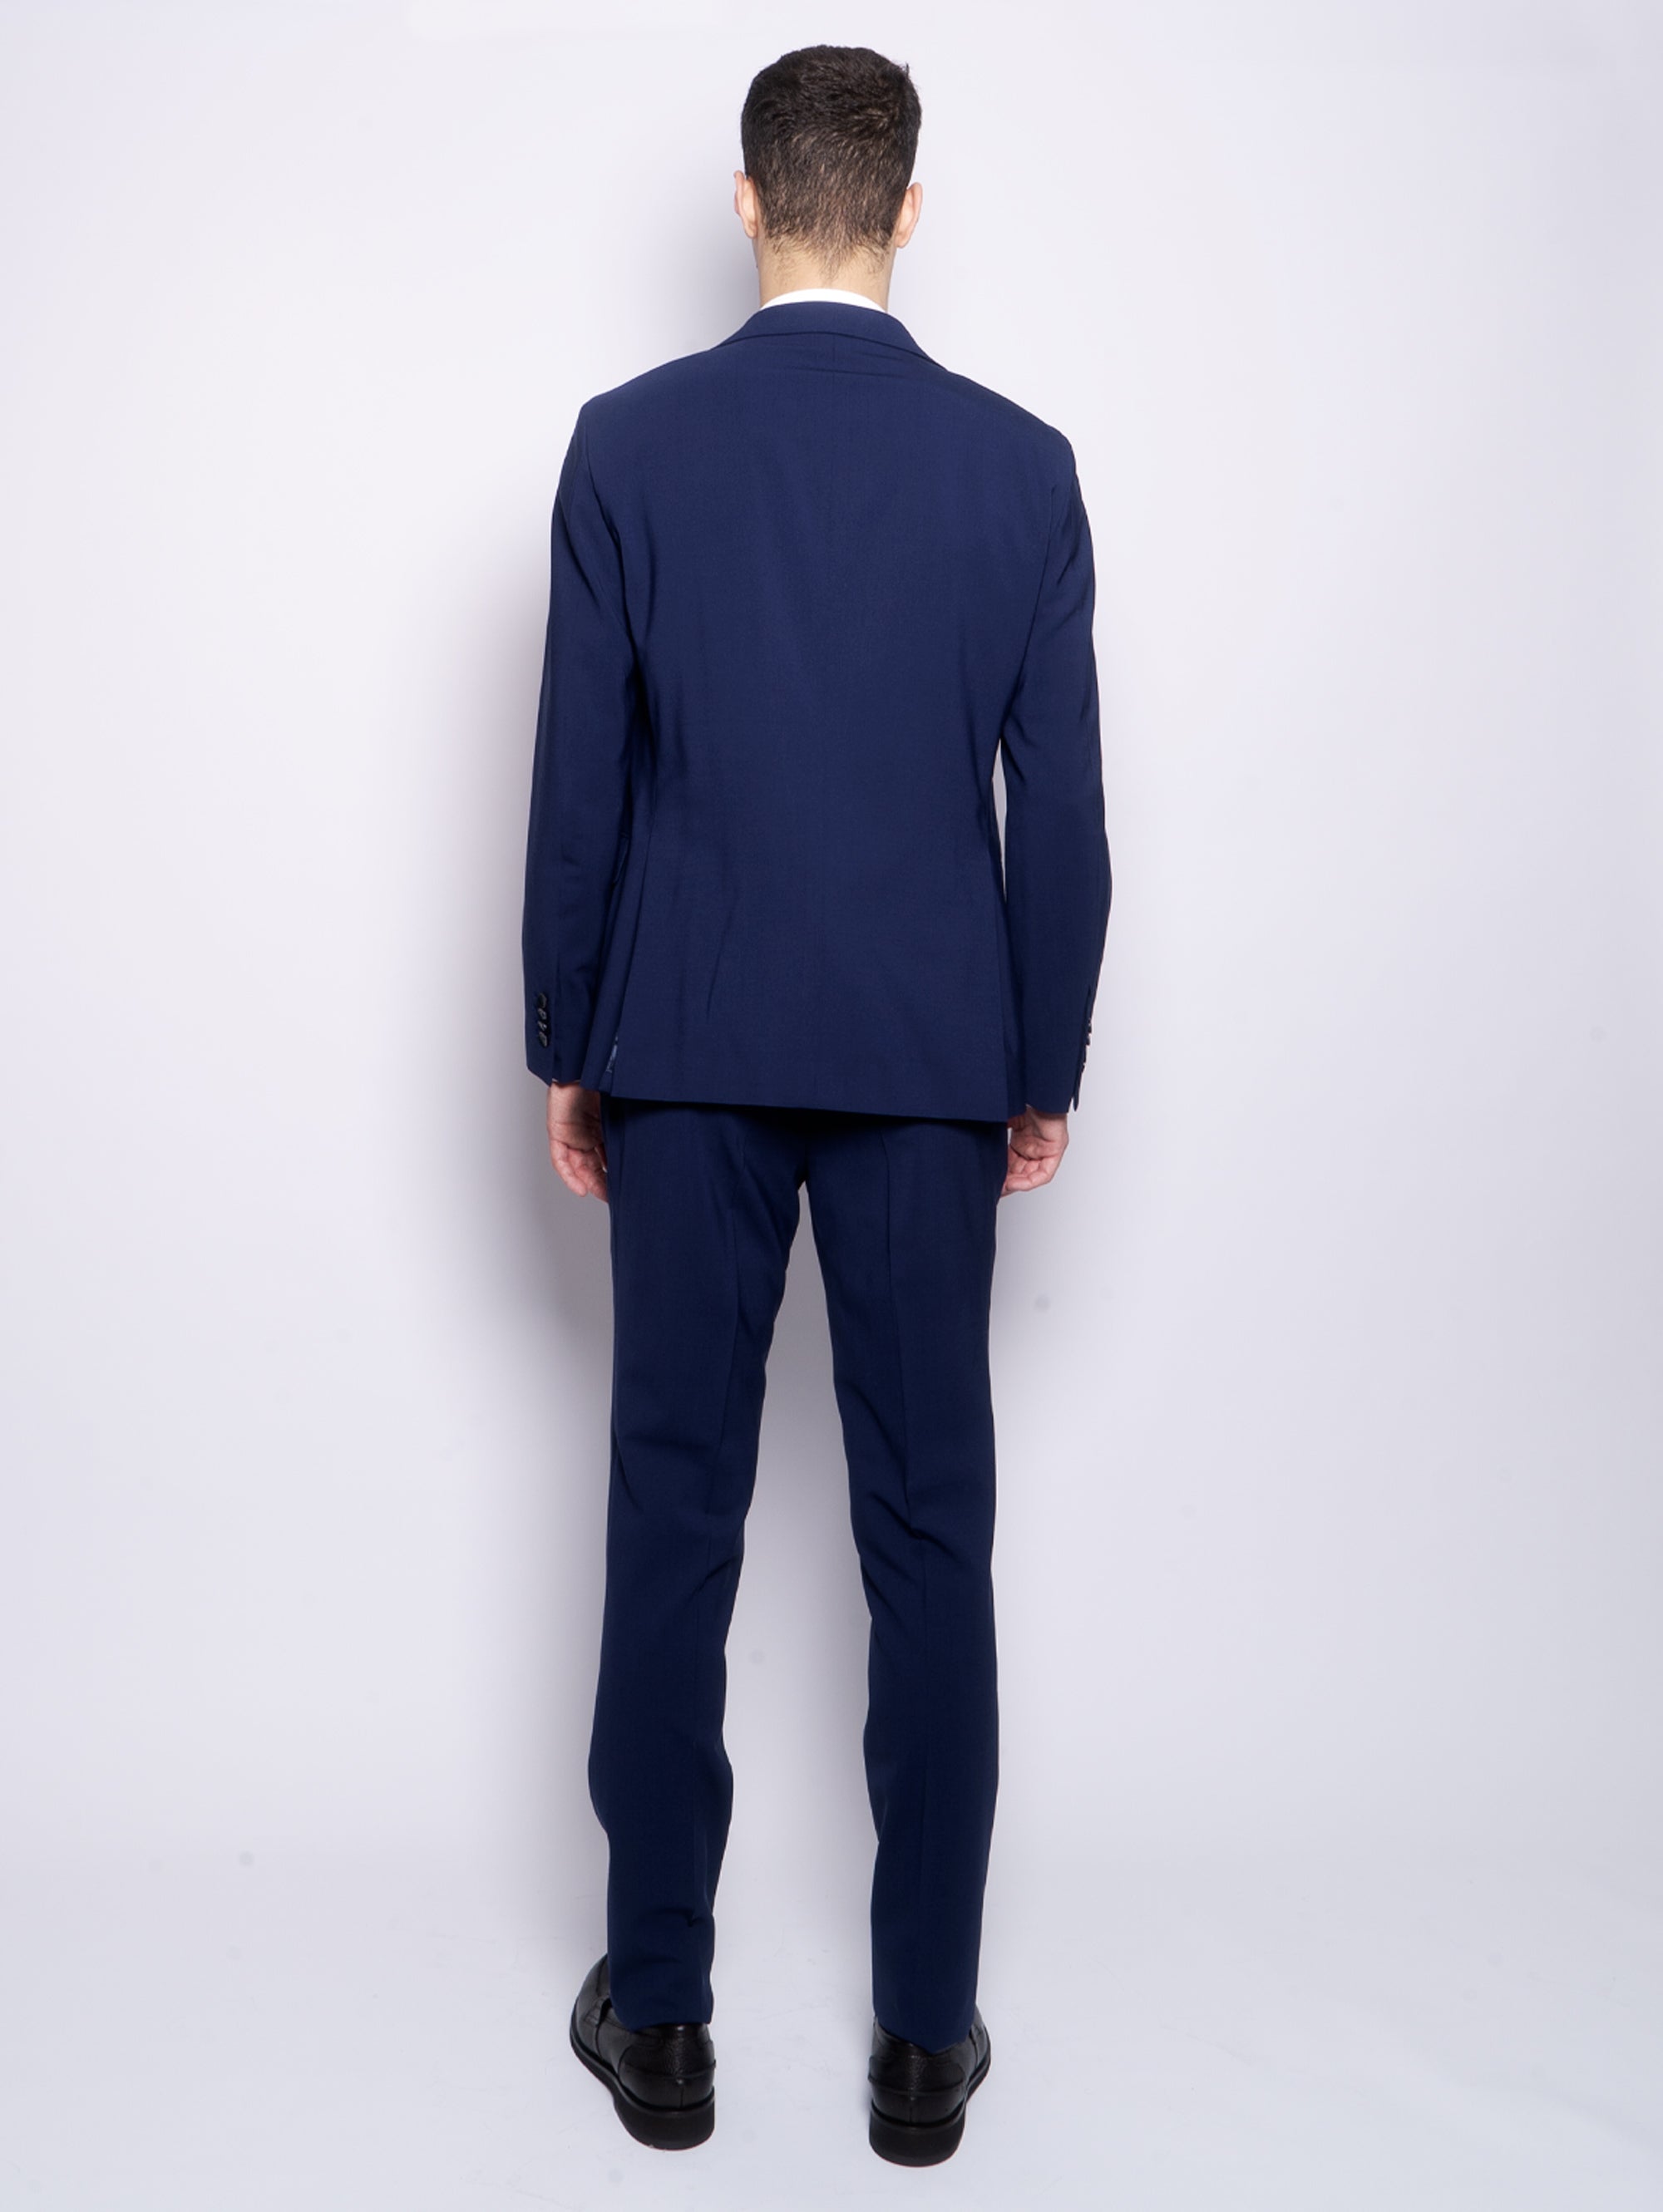 Suit in Fresh Wool from the Blue Archive Line